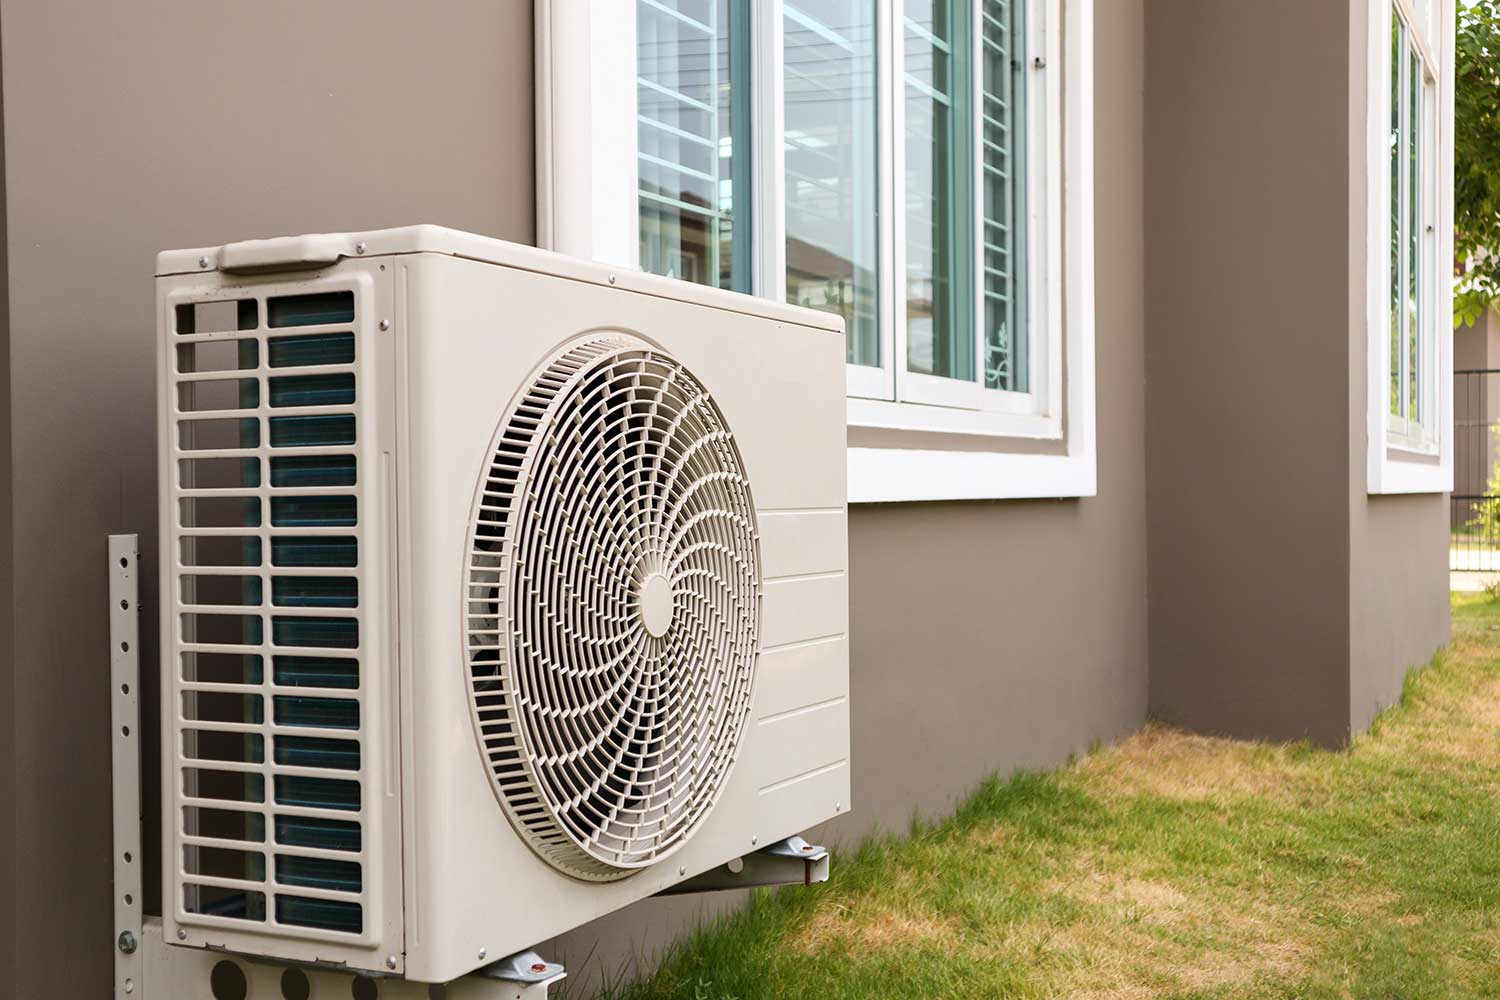 Considerations for AC installation